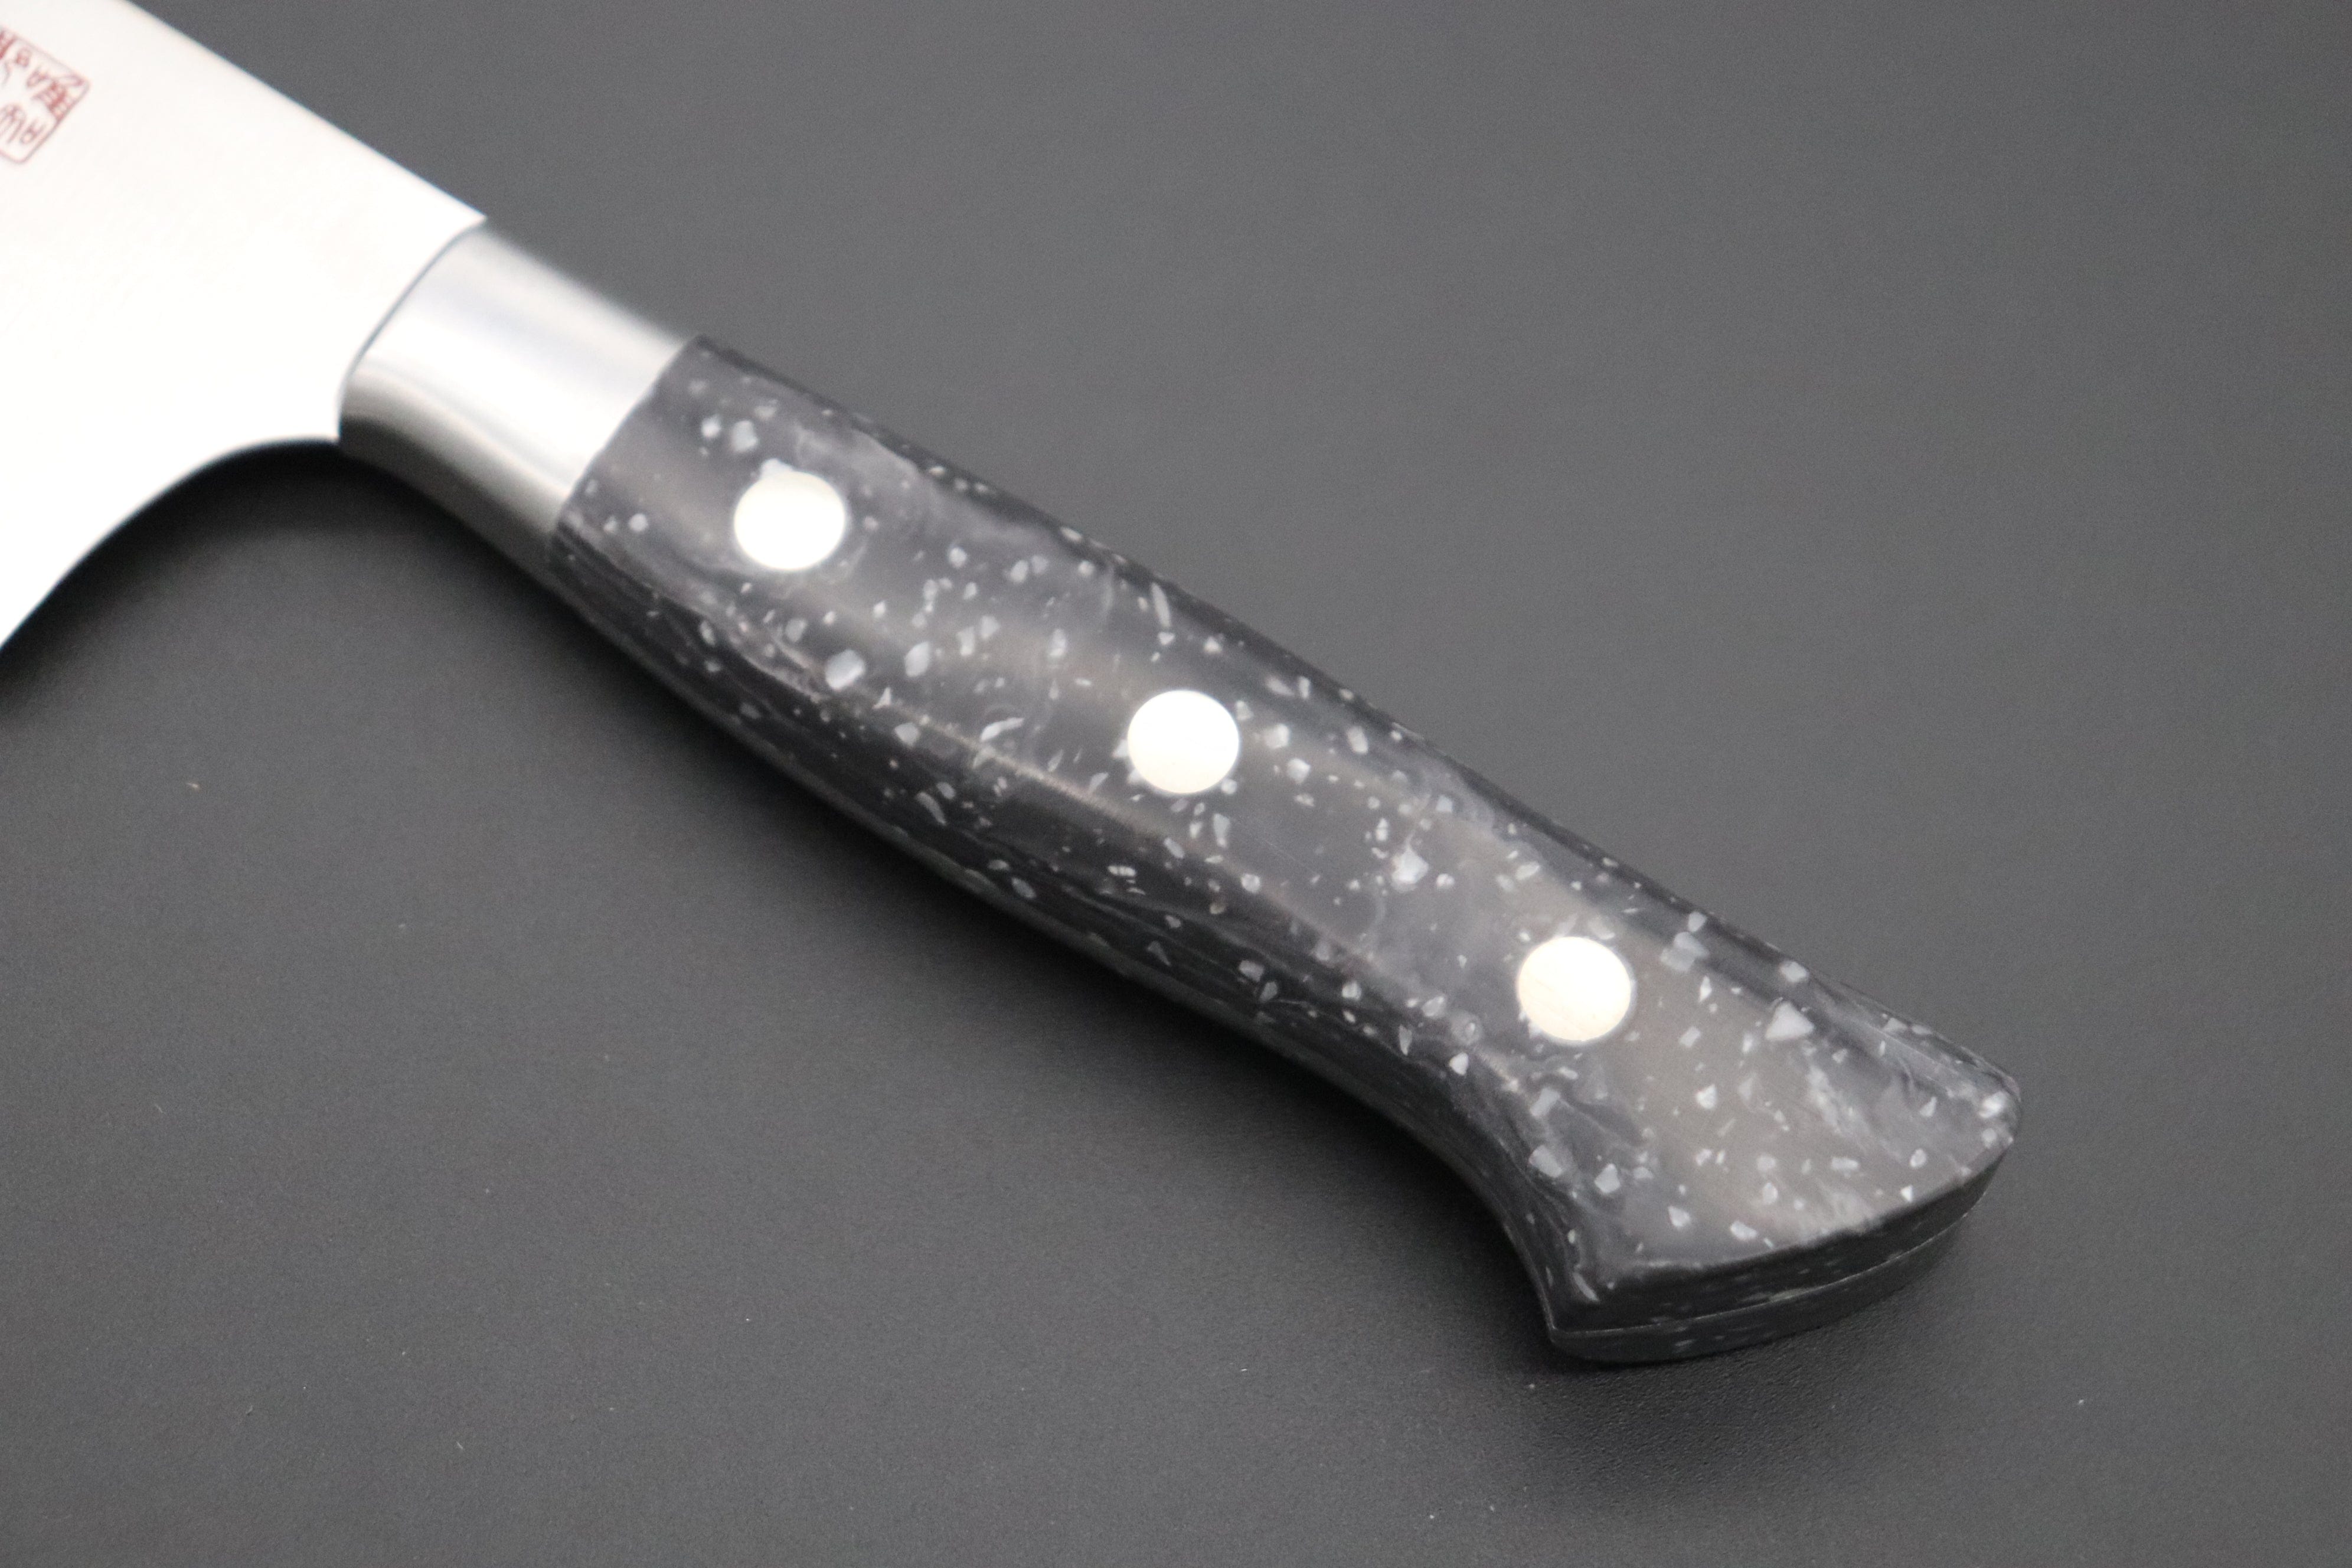 https://japanesechefsknife.com/cdn/shop/products/hattori-gyuto-hattori-forums-fh-series-limited-edition-snow-in-the-dark-gyuto-210mm-270mm-3-sizes-dupont-corian-handle-40239492071707.jpg?v=1673495873